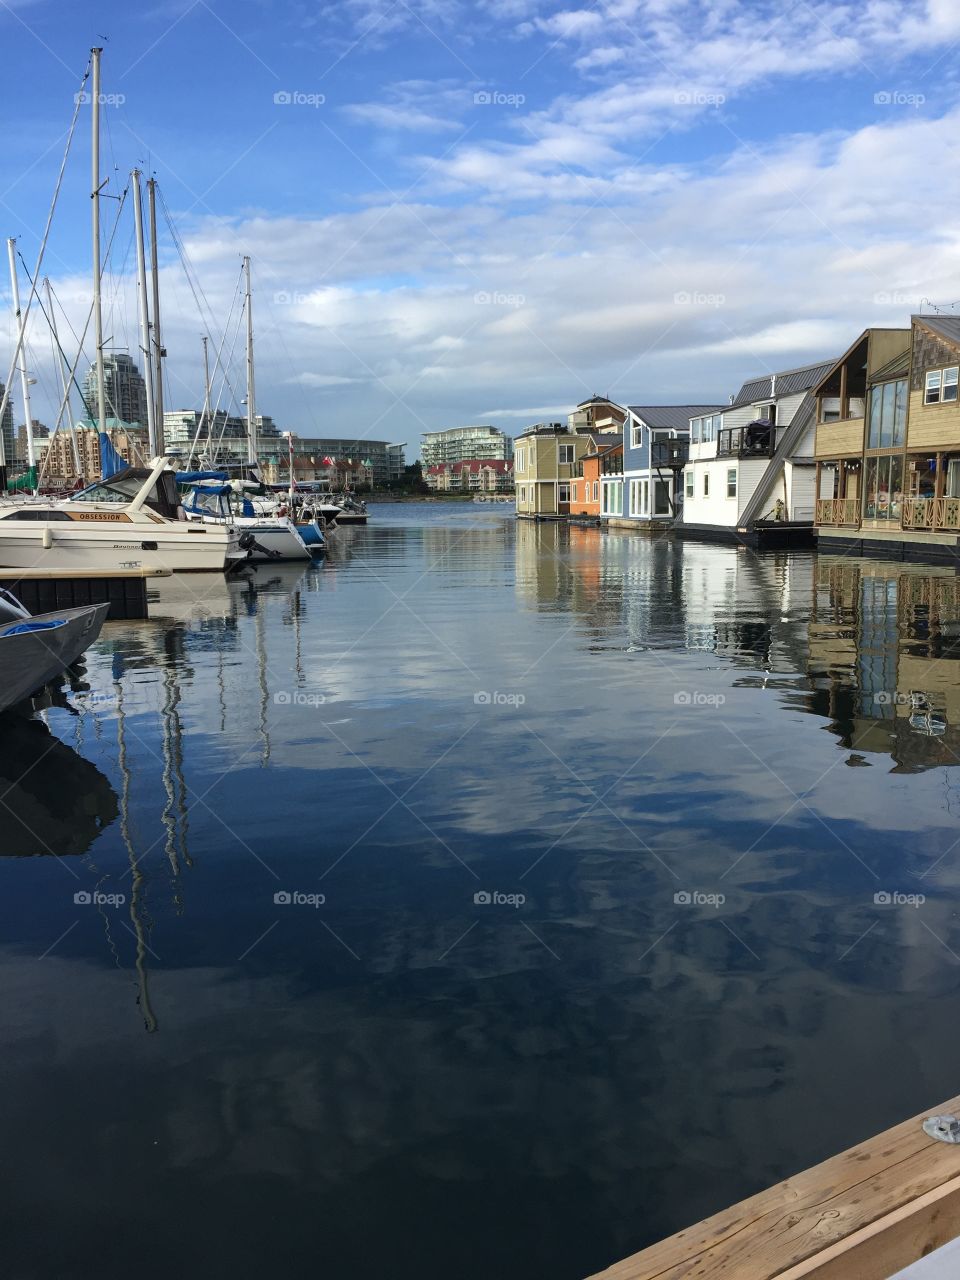 Calm day on the harbour, water like glass